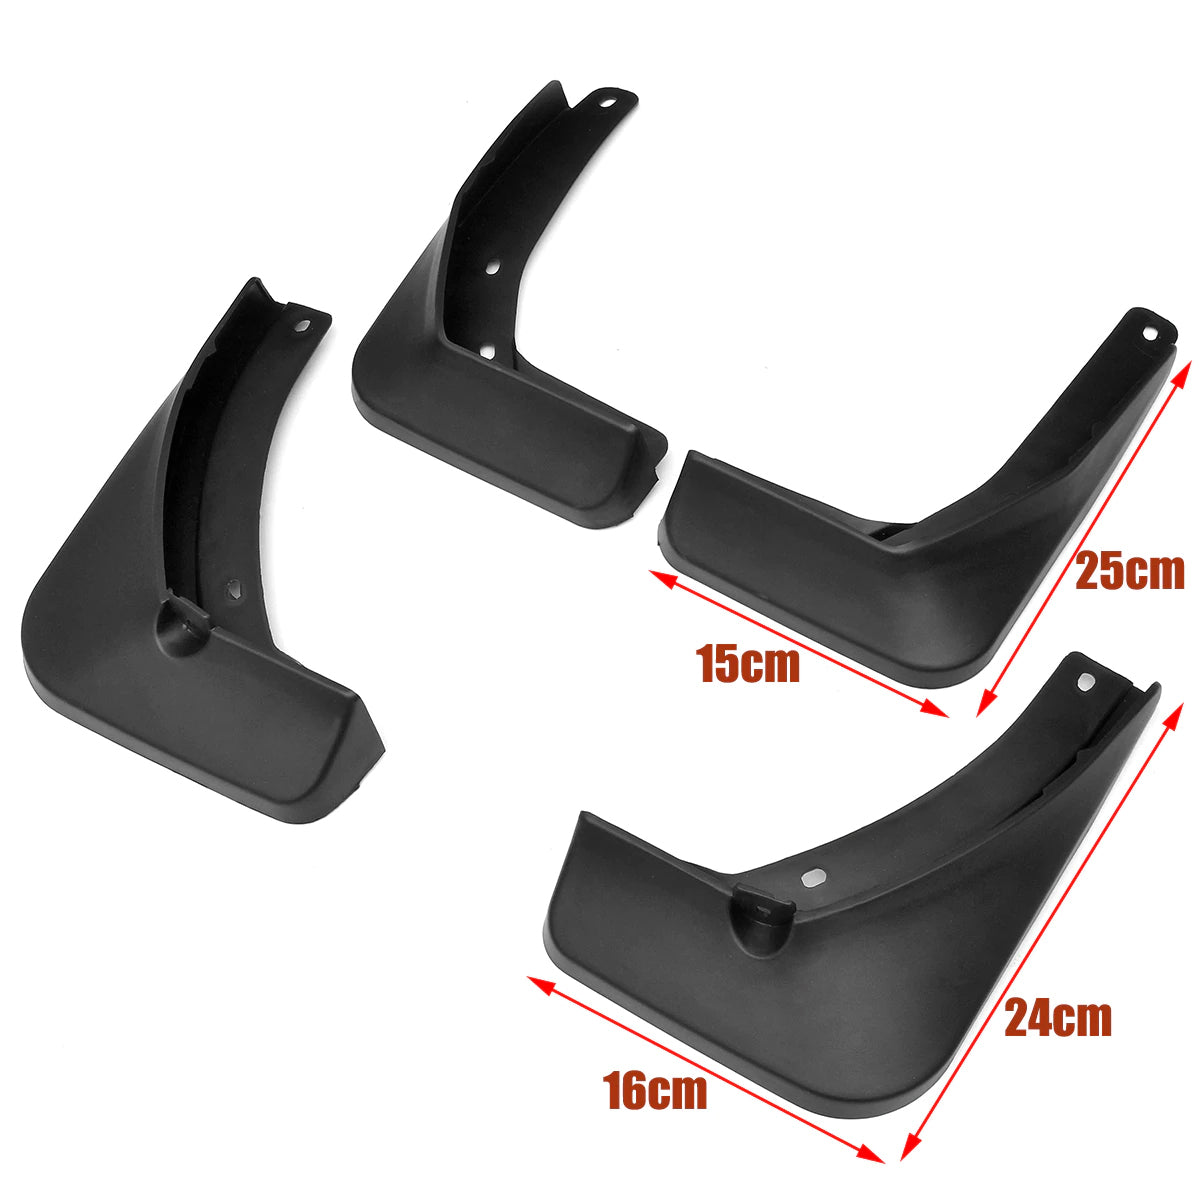 Oshotto Mud Flap (O.E.M Type) For Volkswagen Polo 2009,2010,2011,2012,2013,2014 (T-I)(Set of 4)